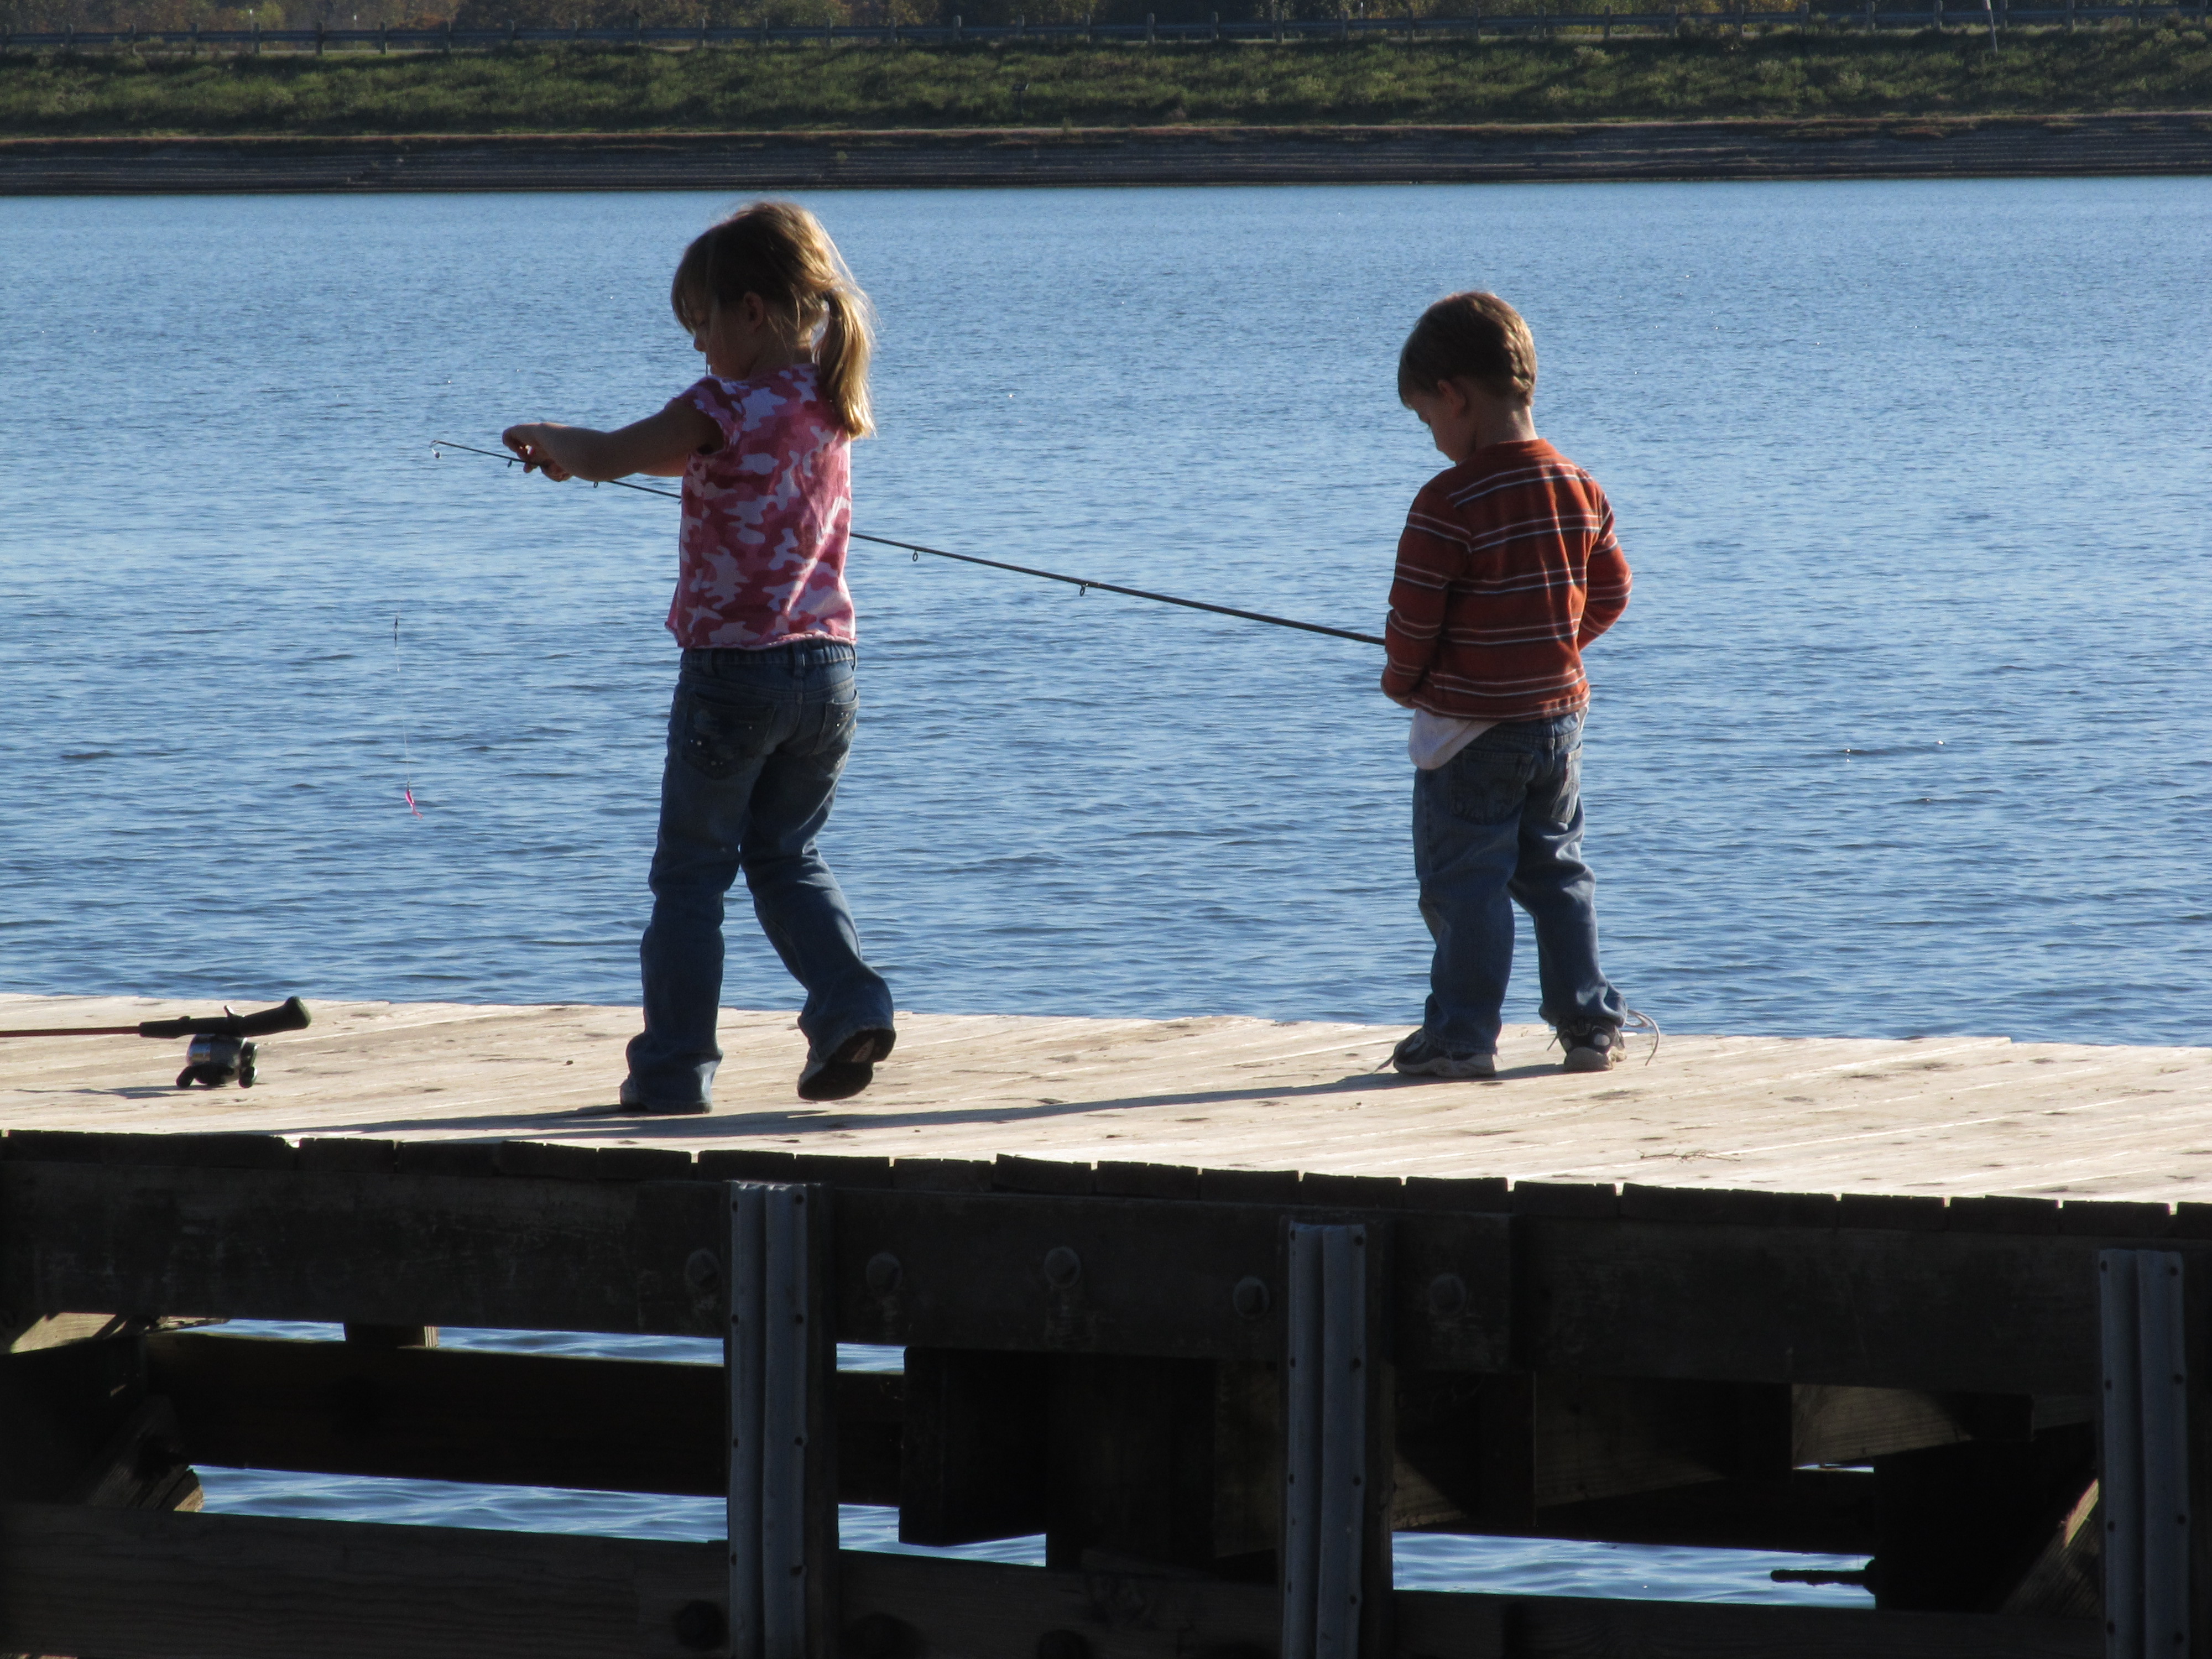 Kids fishing as an activity to reduce screen time